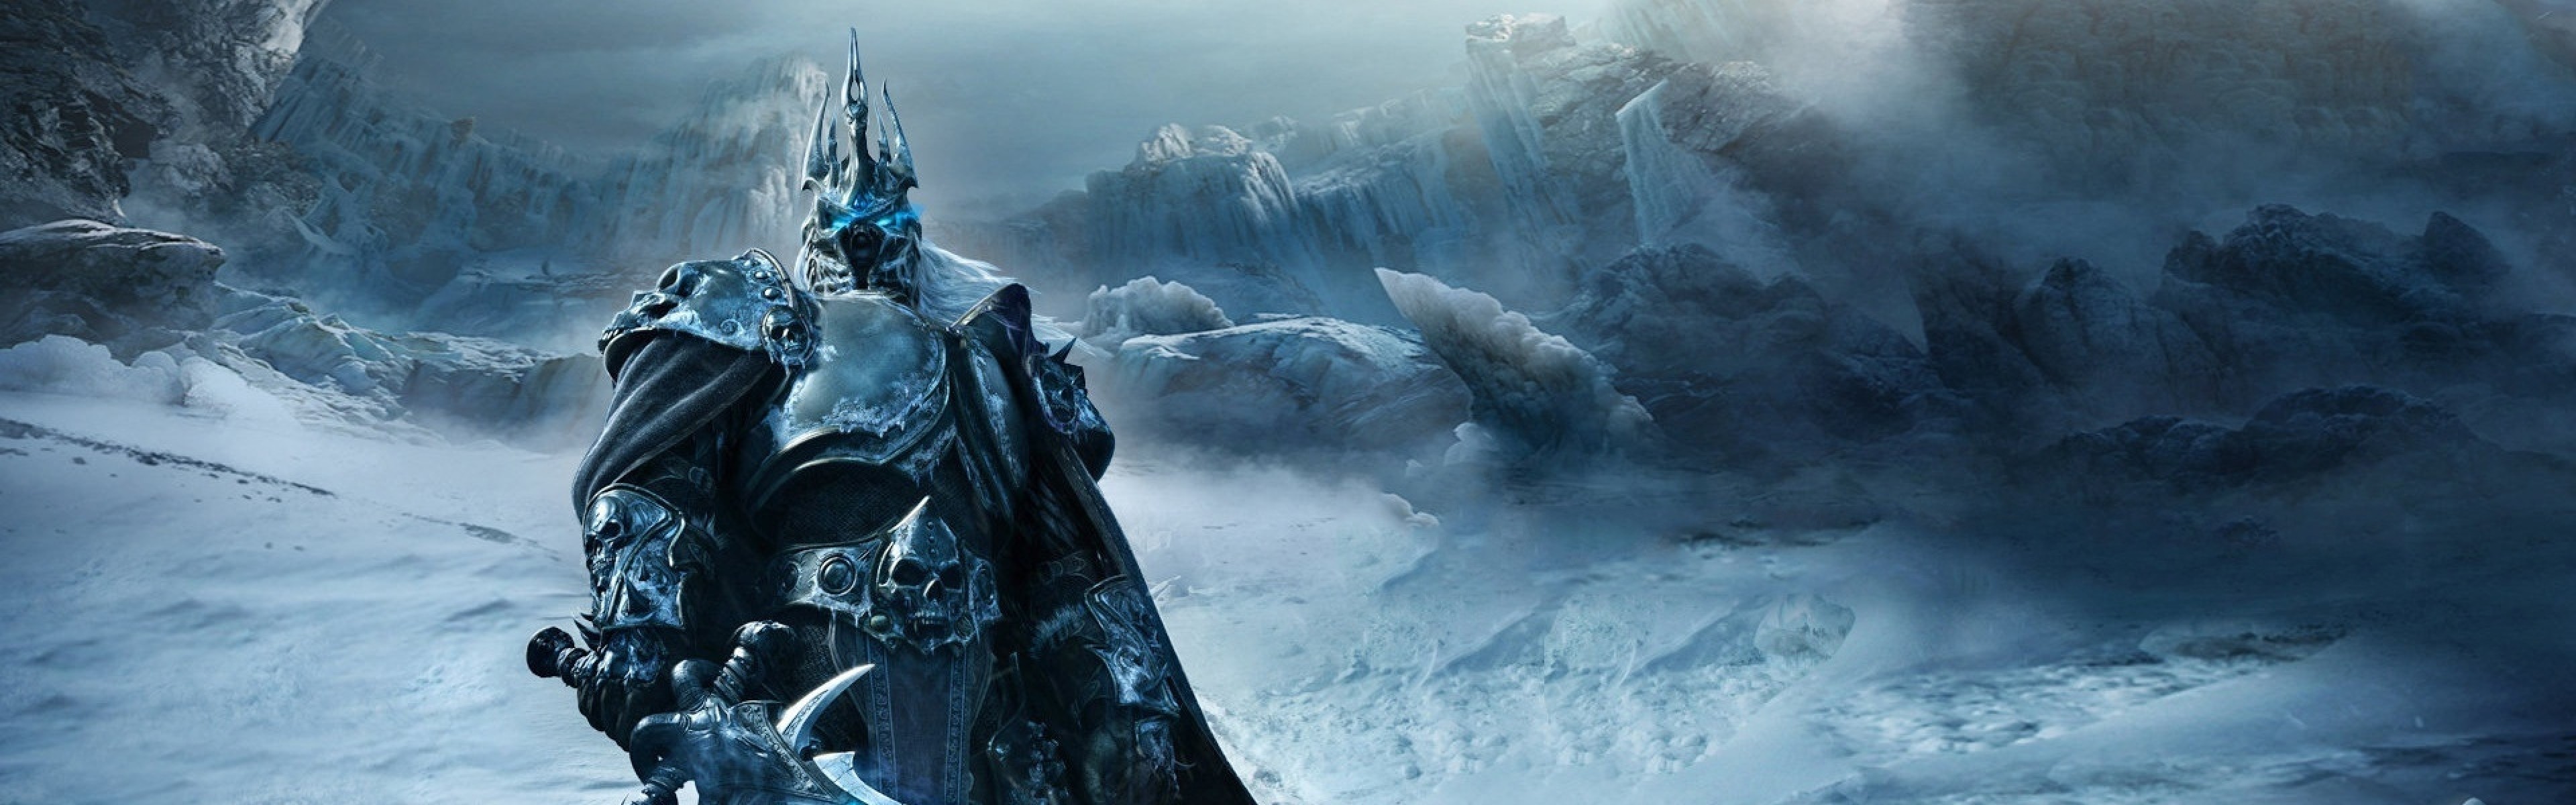 3840x1200  Wallpaper game, warrior, world of warcraft, wrath of the lich king